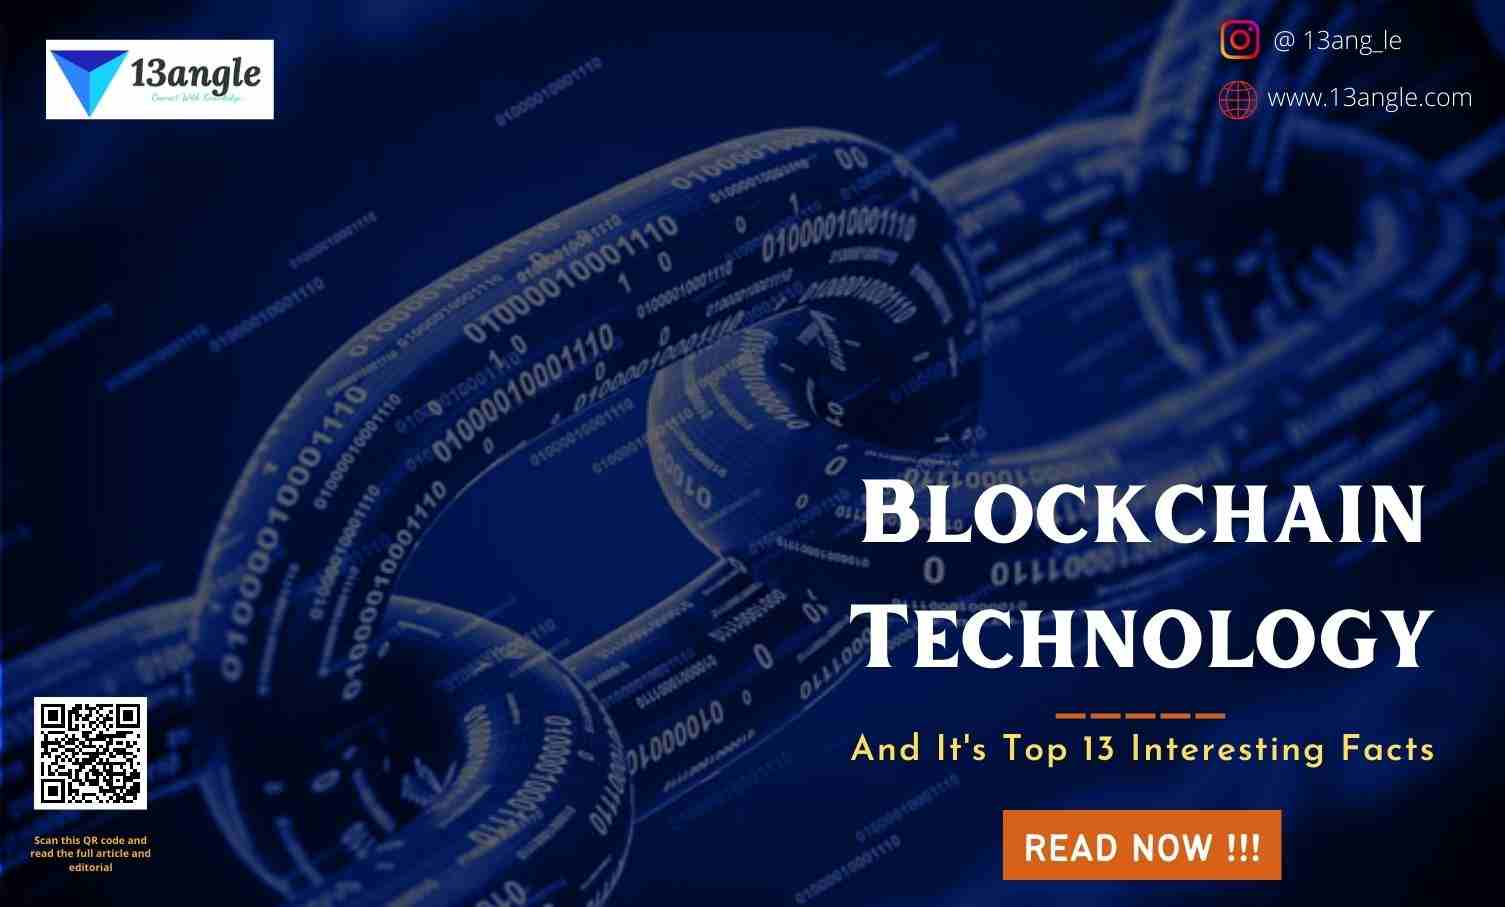 Blockchain Technology And It's Top 13 Interesting Facts- 13angle.com